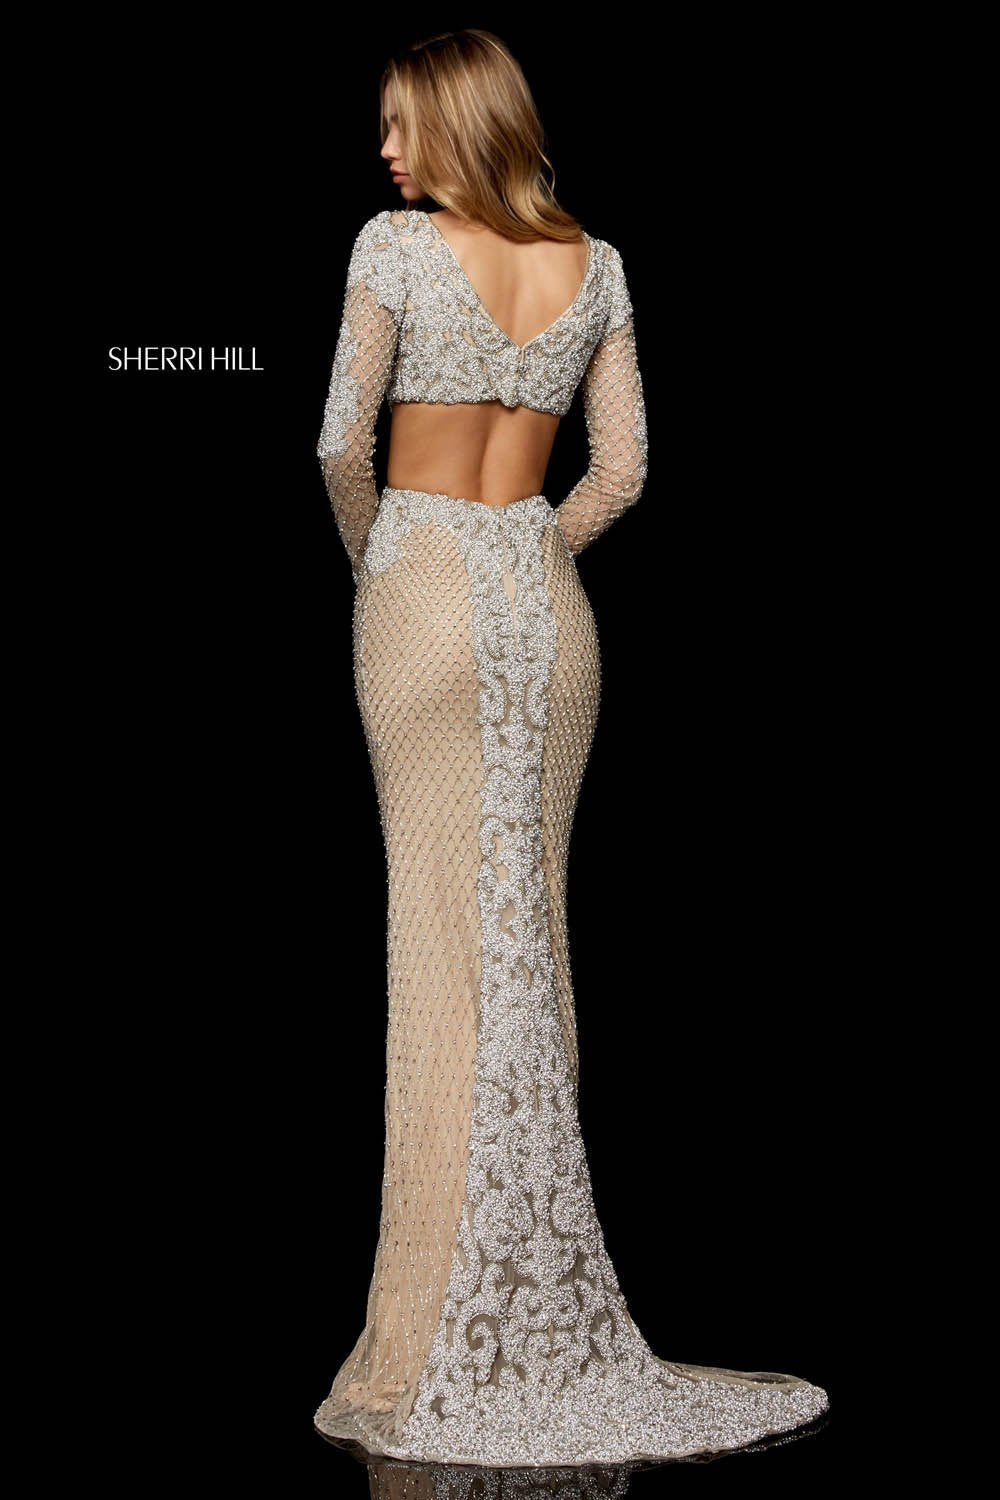 Sherri Hill 52325 dress images in these colors: Nude Silver.